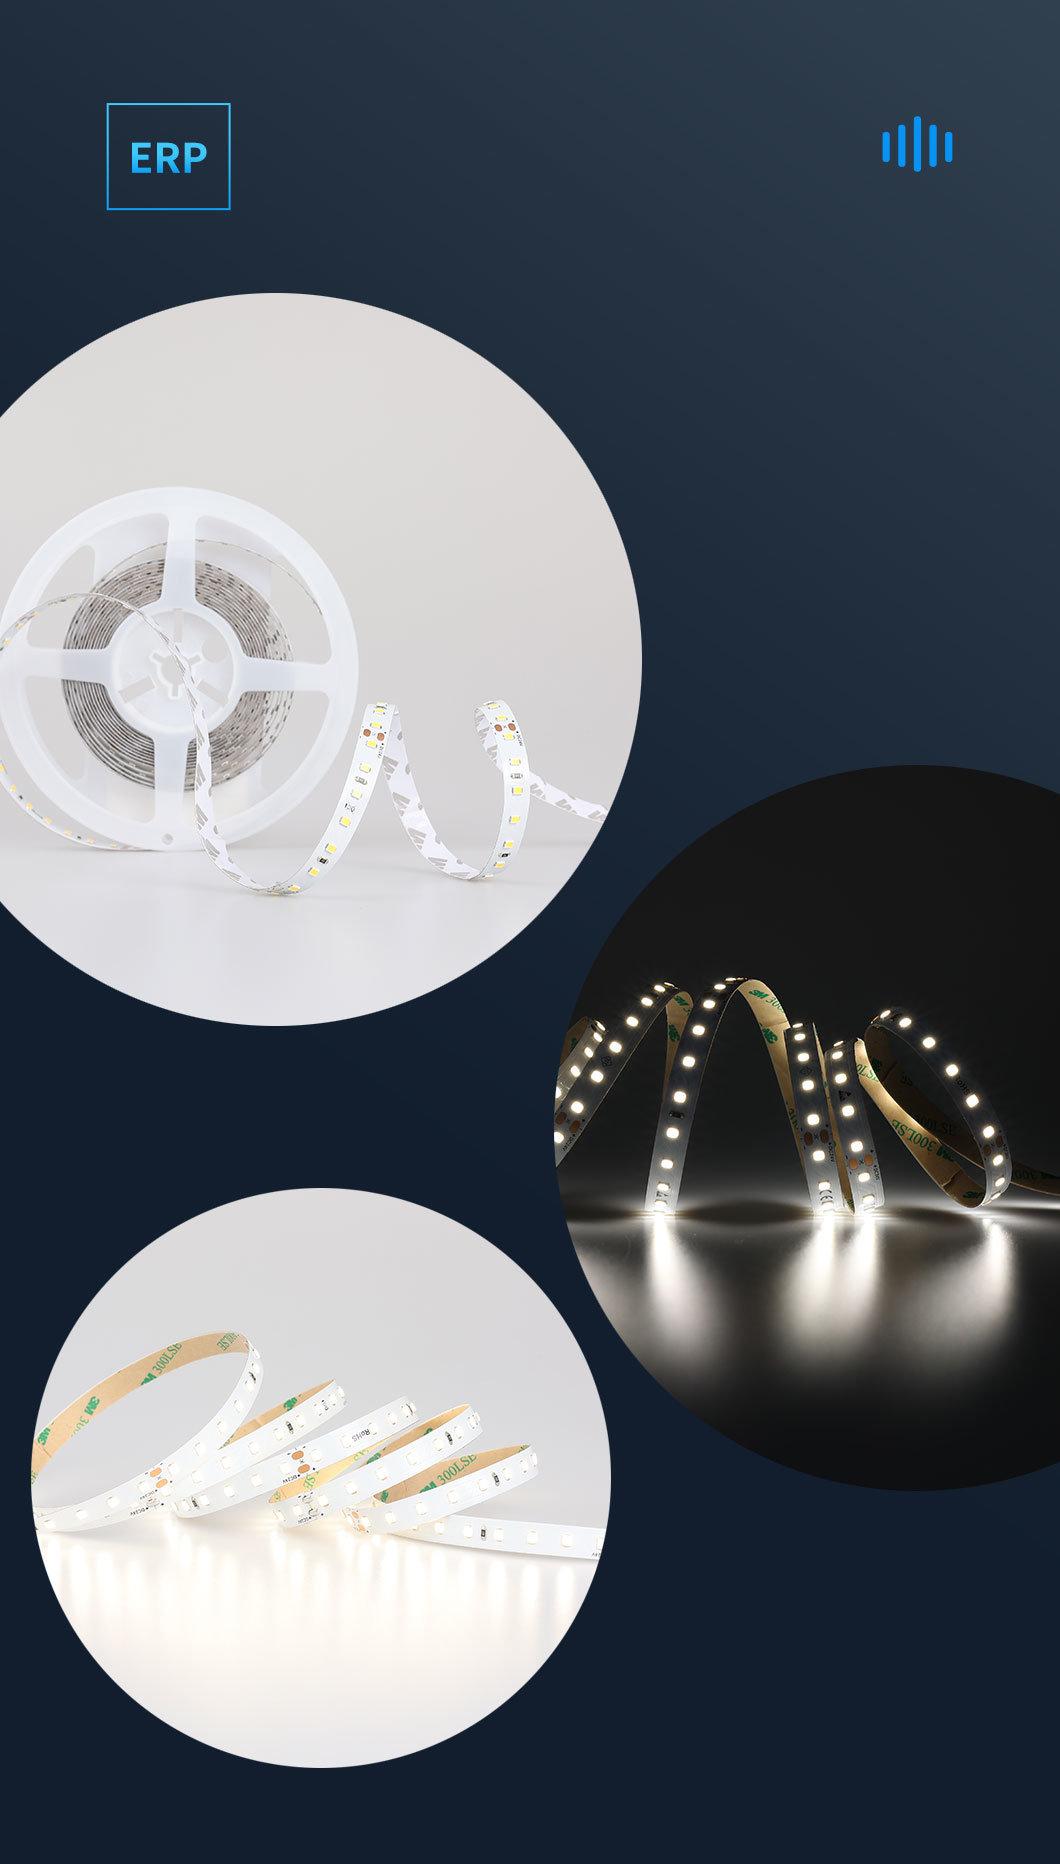 High CRI80 Warm White 2700K 10mm 5m Constant Voltage LED Light Strip with ERP Approval